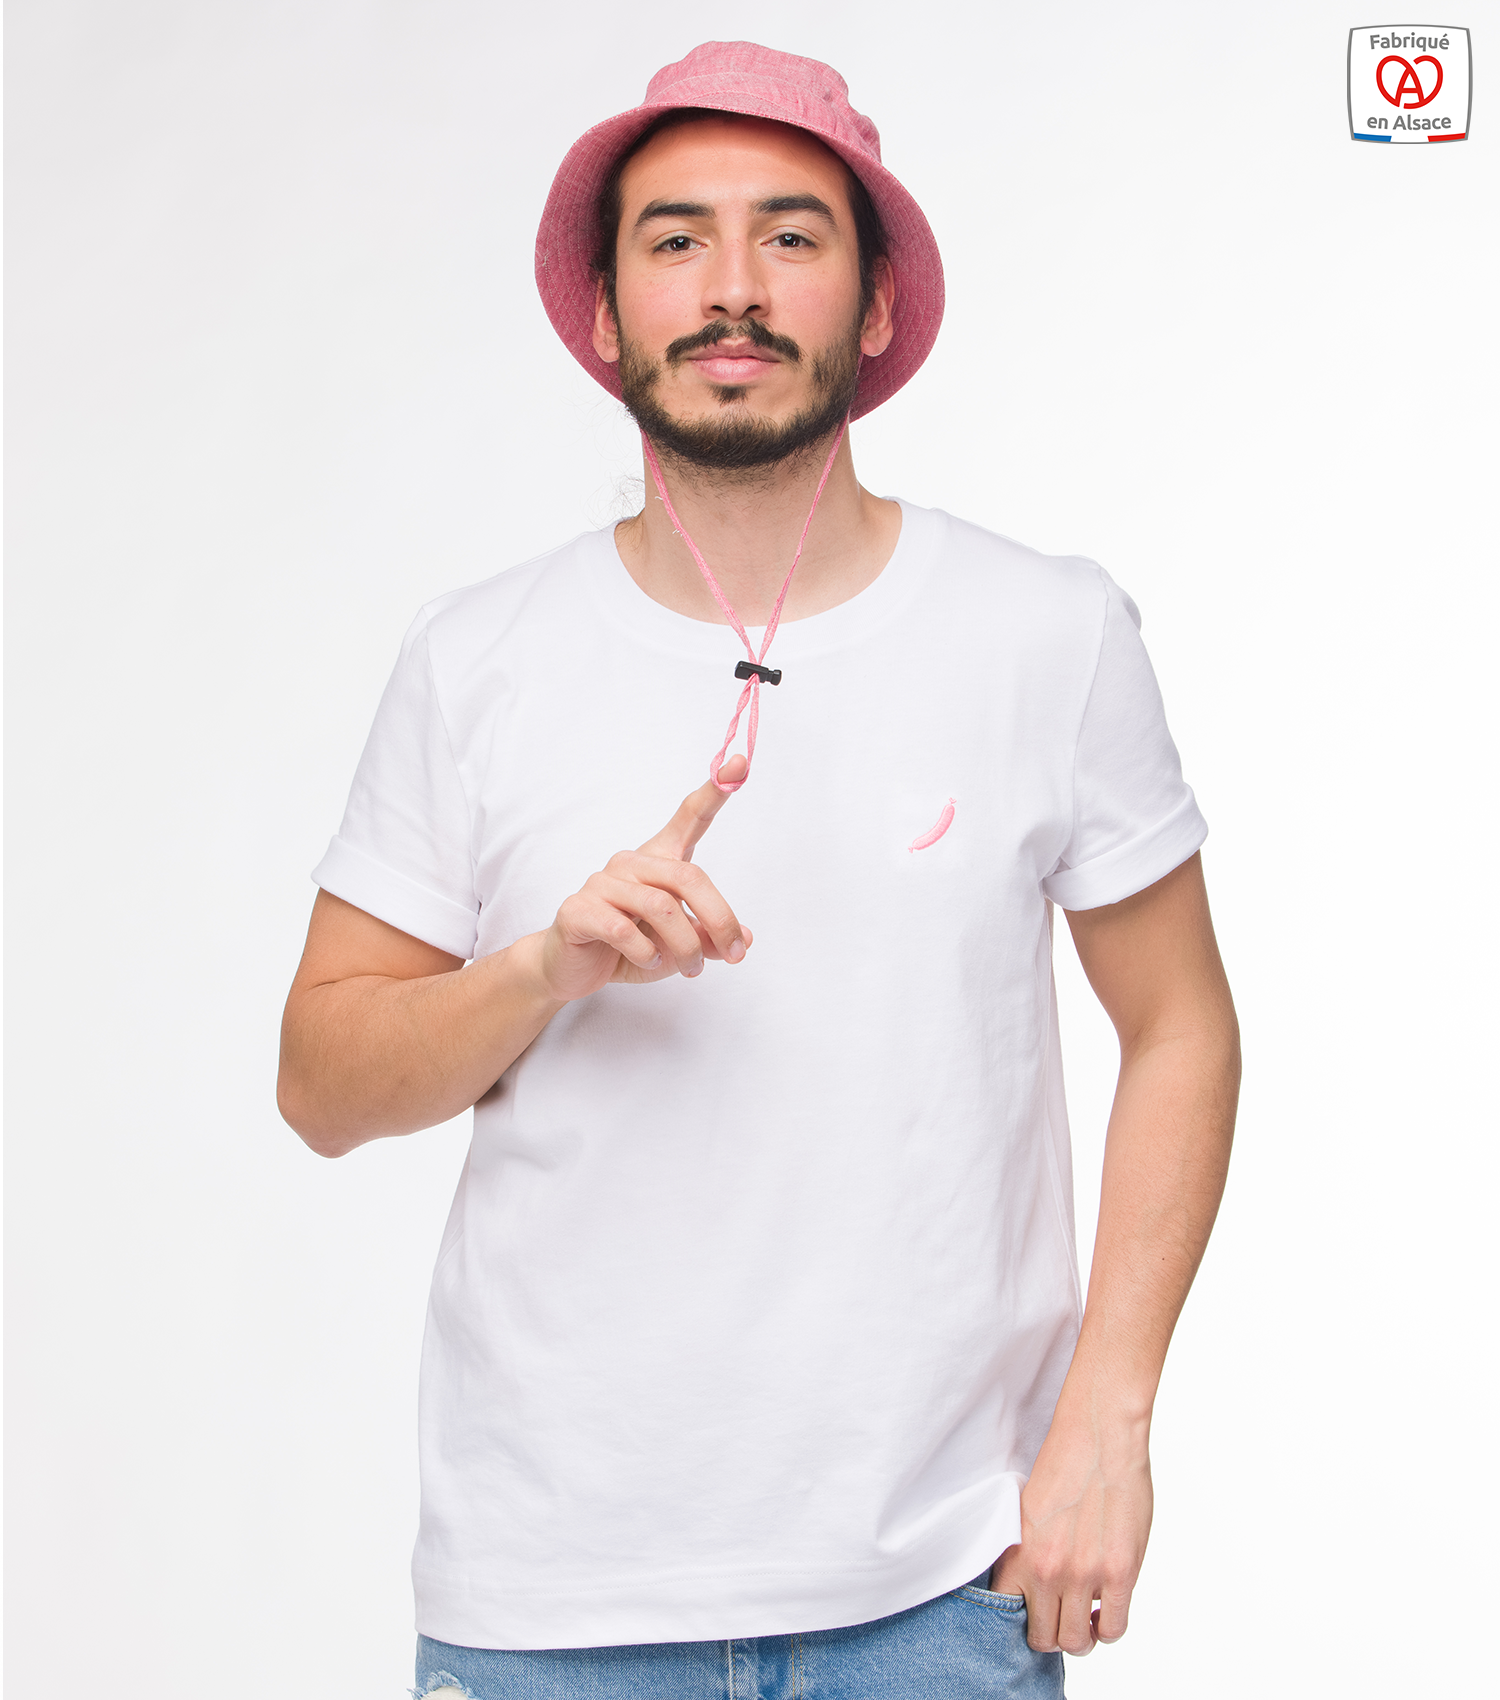 theim-t-shirt-made-in-france-mixte-blanc-saucisse-knack-homme-1500-x-1700-px